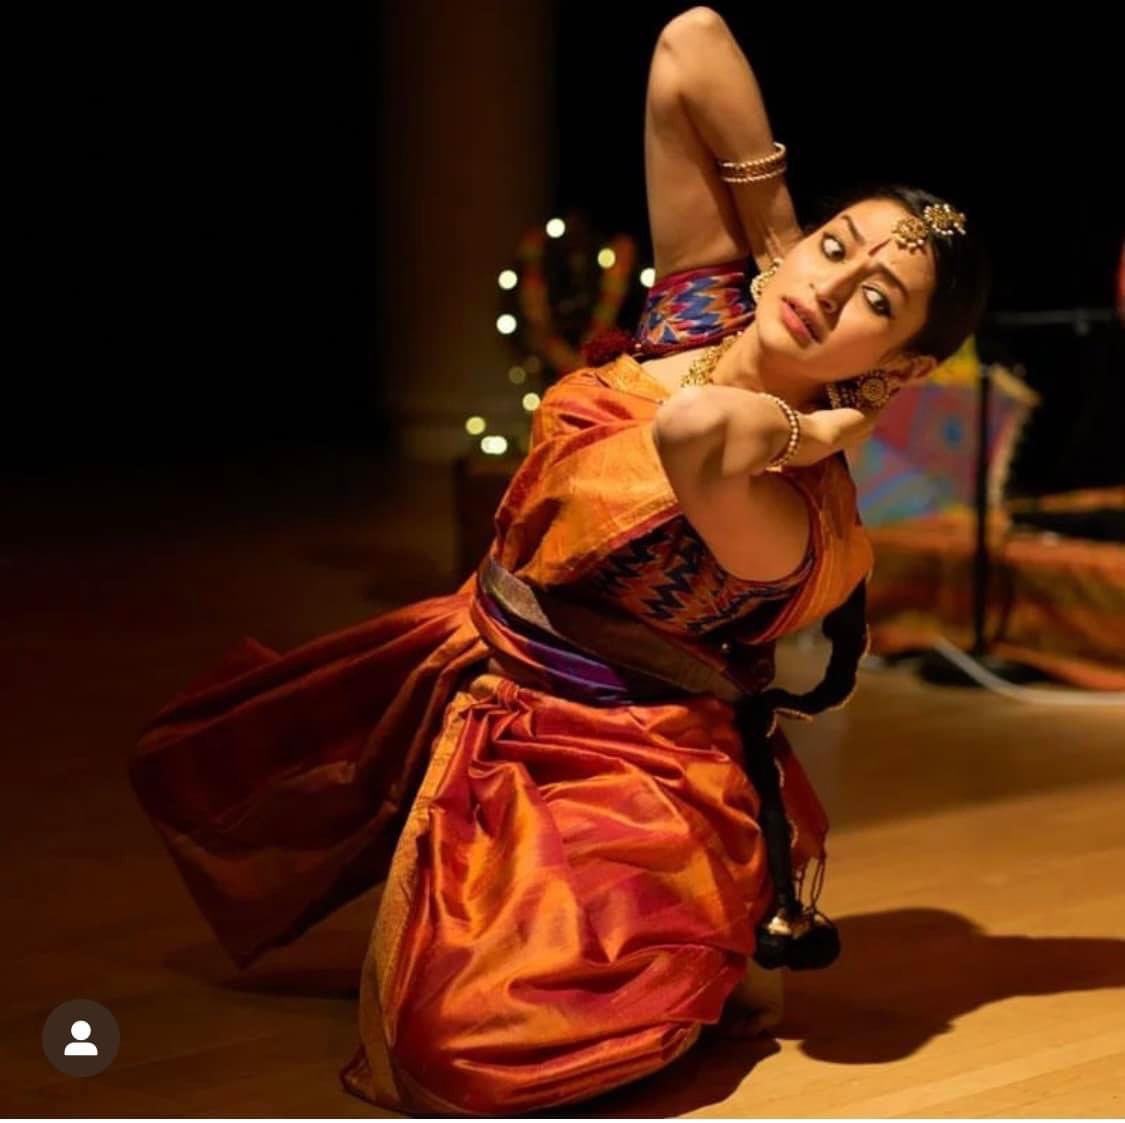 #Ānartam 3 Days to go! @SuhaniDhanki_FC curveonline.co.uk/whats-on/shows… PC- @simonrichardson Supported by @CurveLeicester and @Akademi